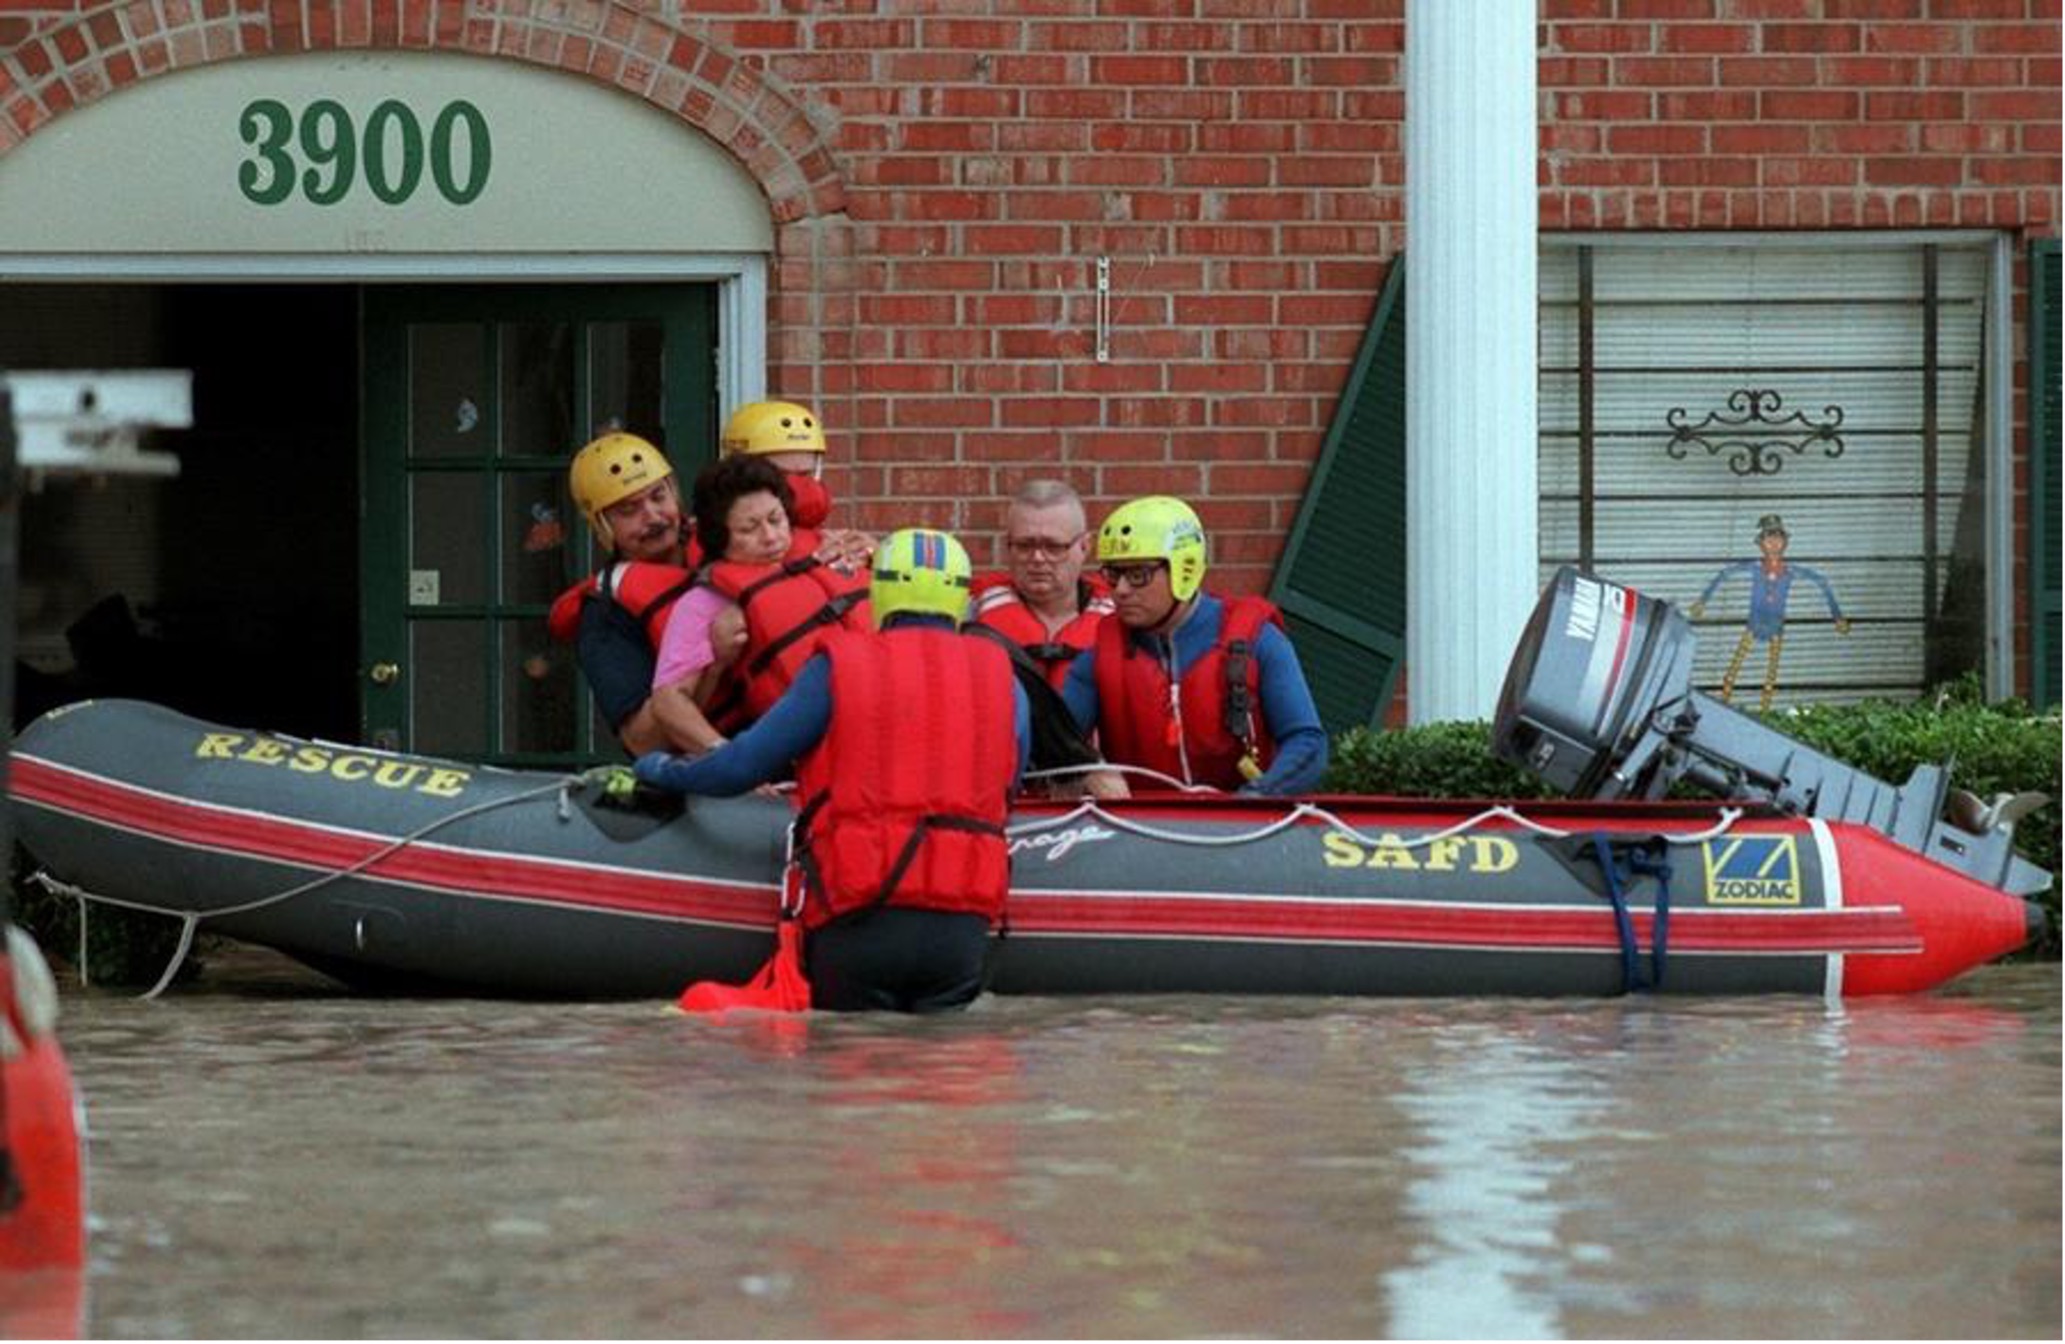 The San Antonio Fire Department conducts a rescue during major flooding in 2002. Photo credit: San Antonio Express-News